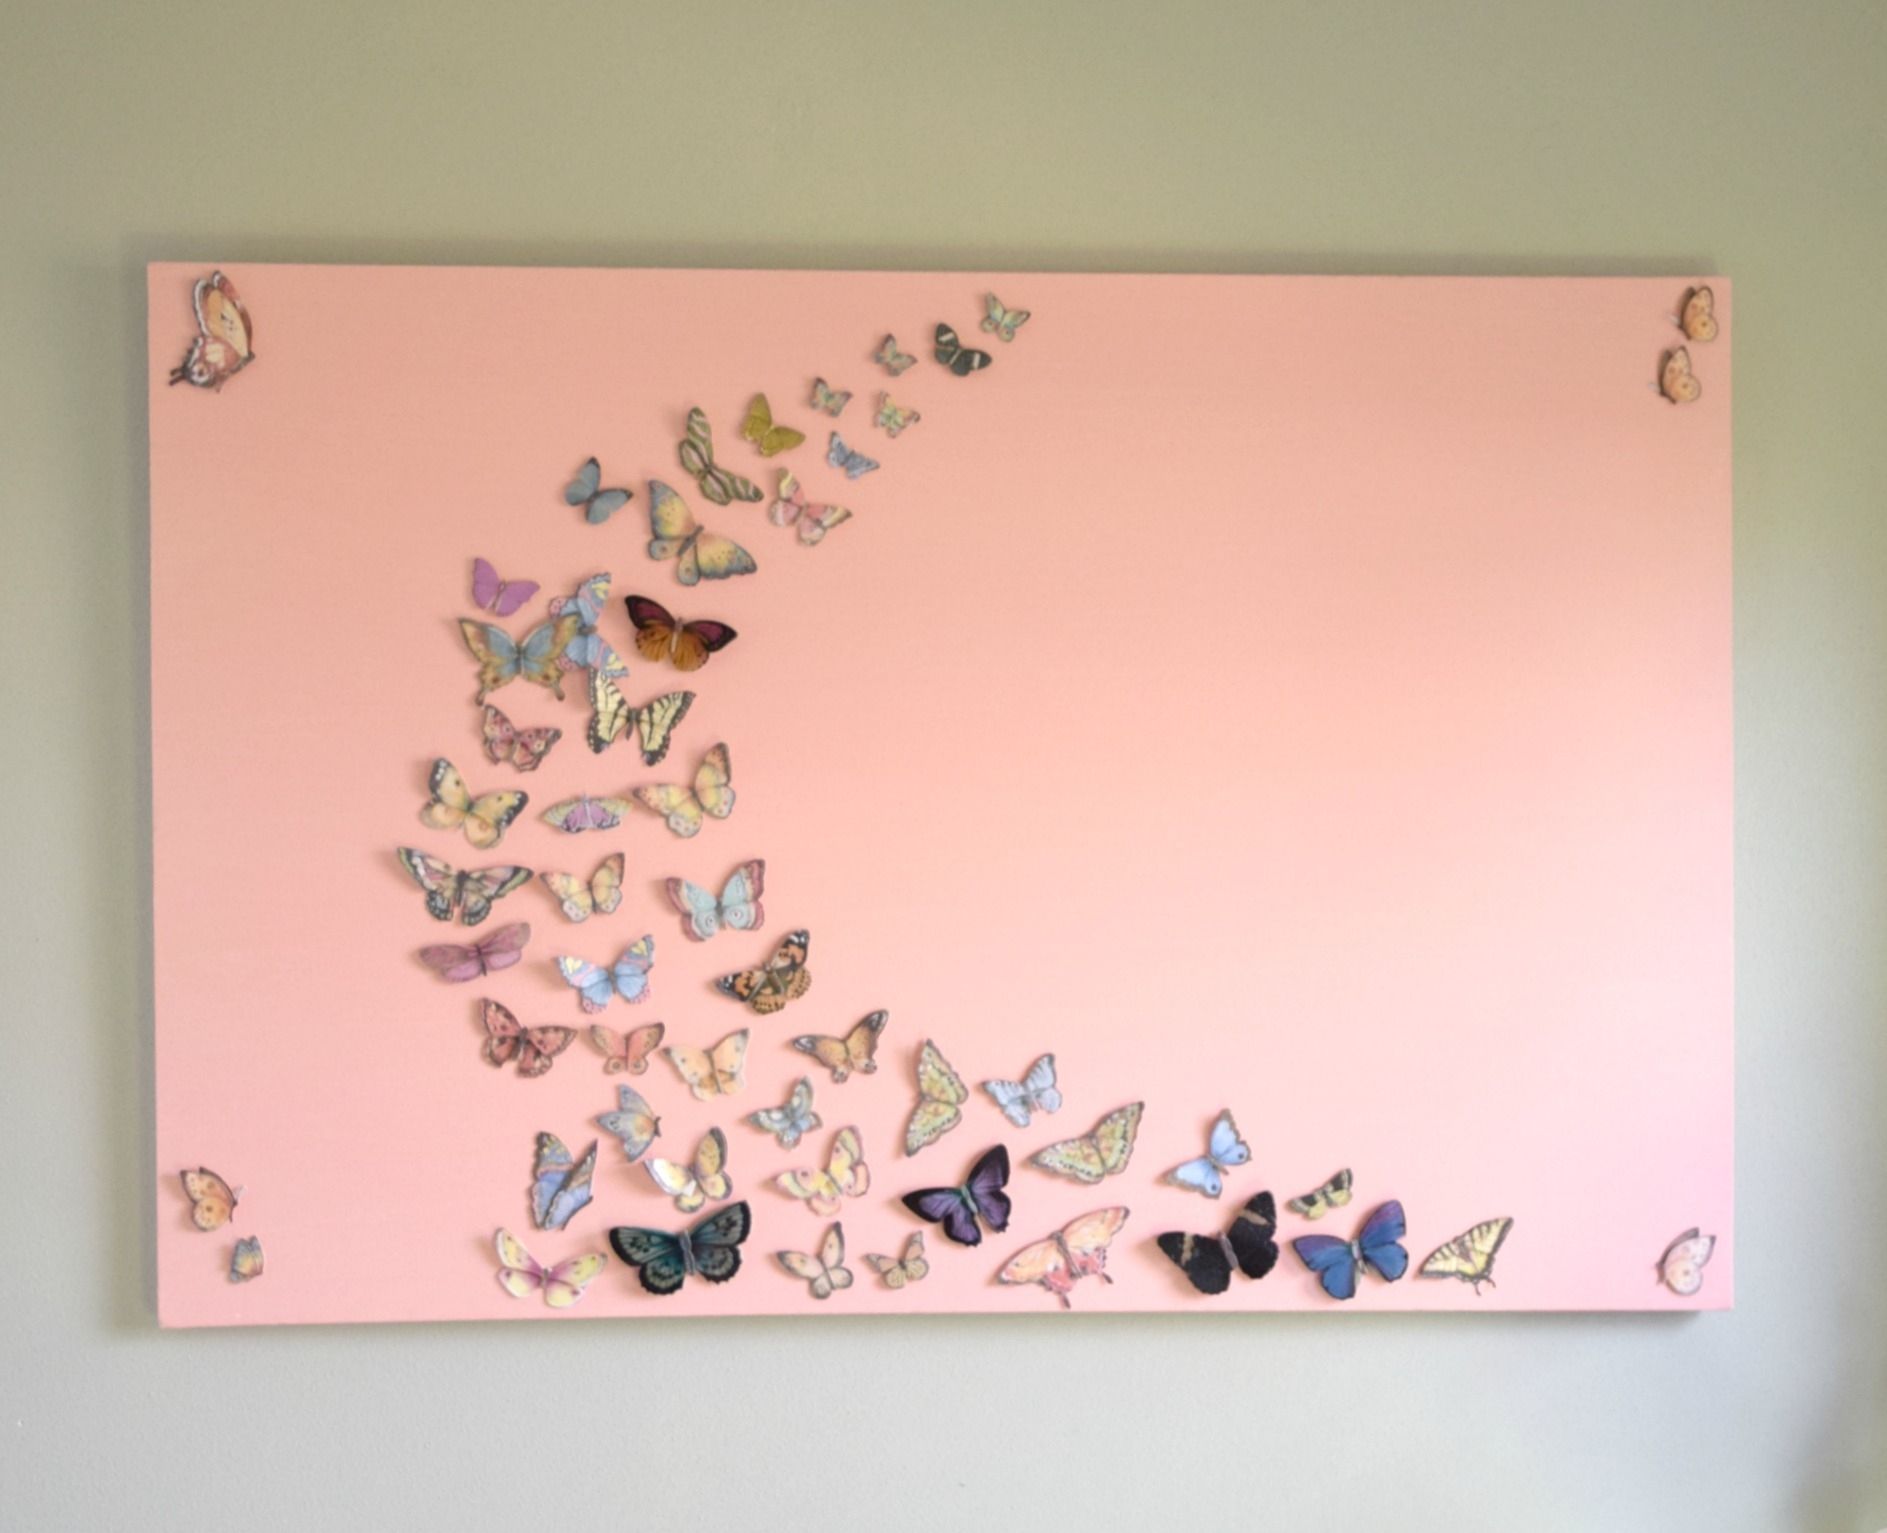 Girl Bedroom Wall Art, A Butterfly And Canvas Craft • Our House Now Within Butterfly Wall Art (View 20 of 20)